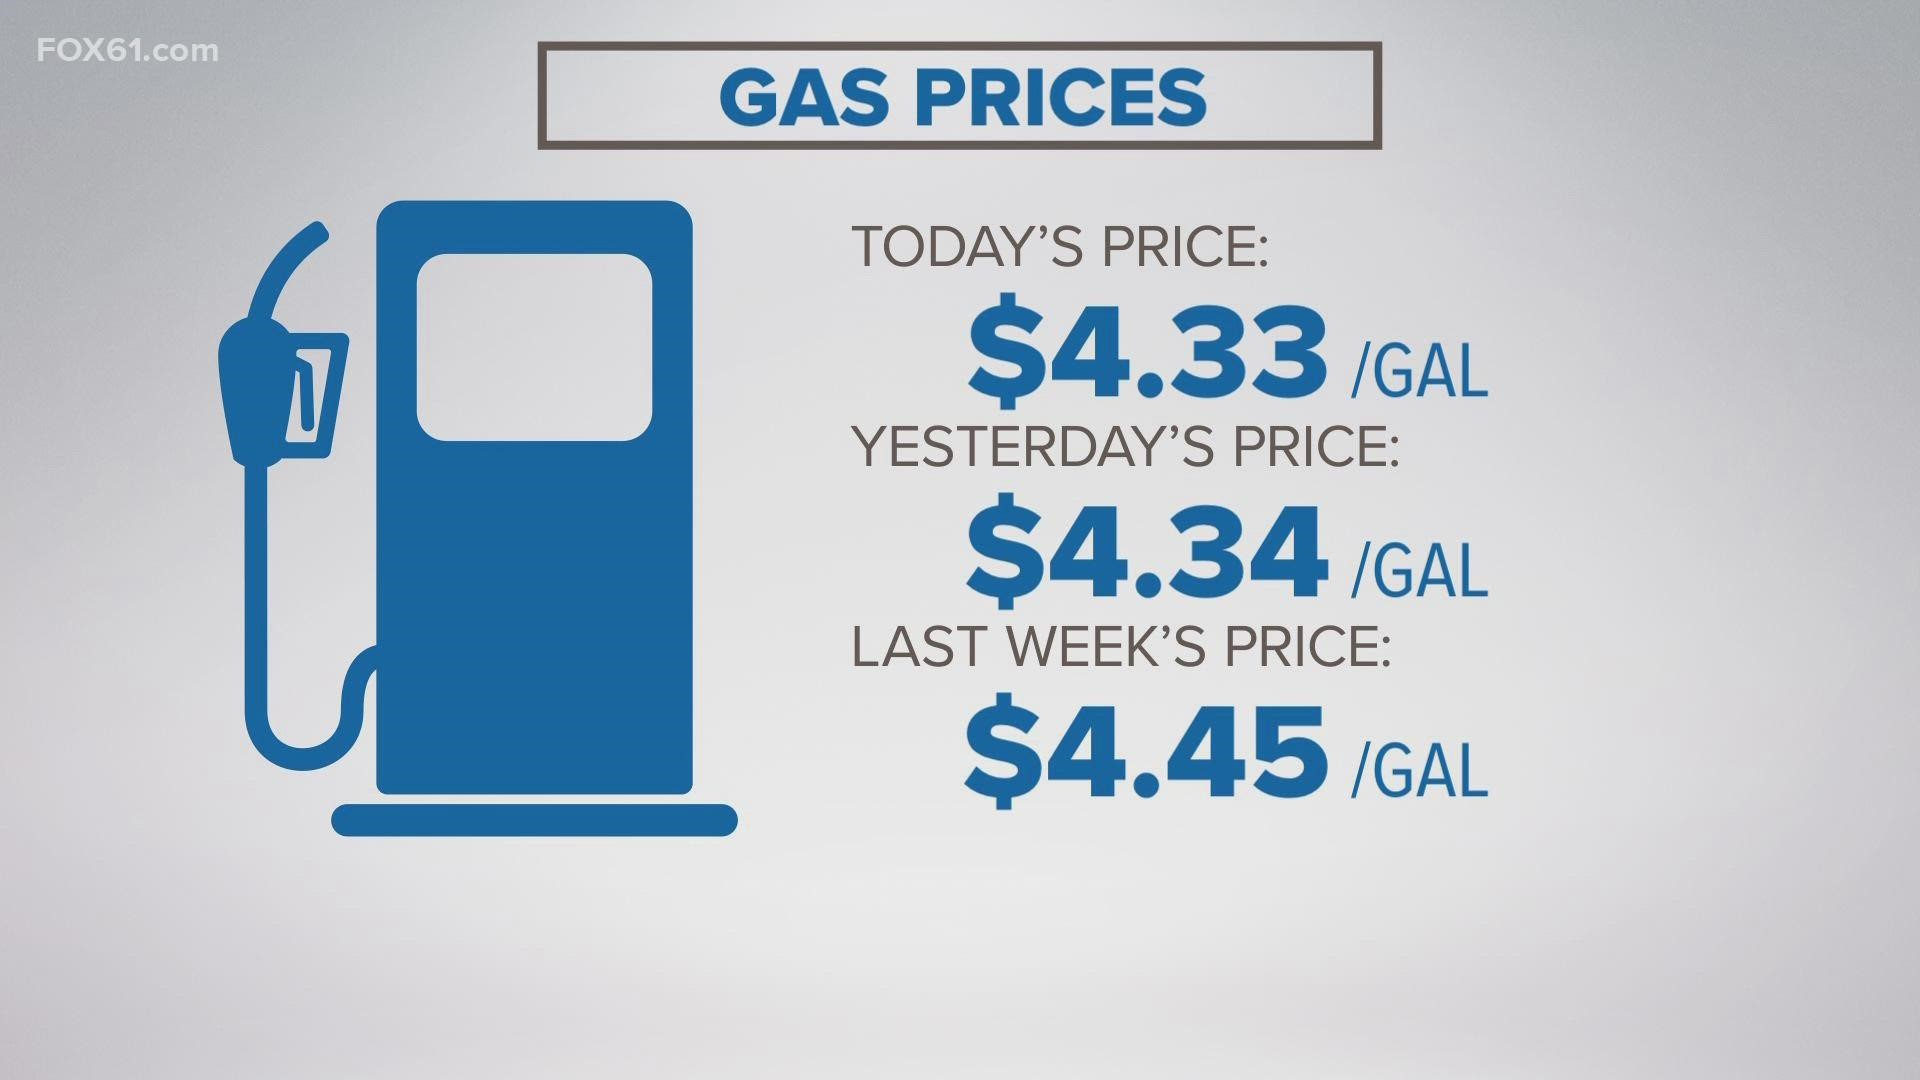 The proposal would suspend the 25-cents-per-gallon gas tax starting on April 1st.